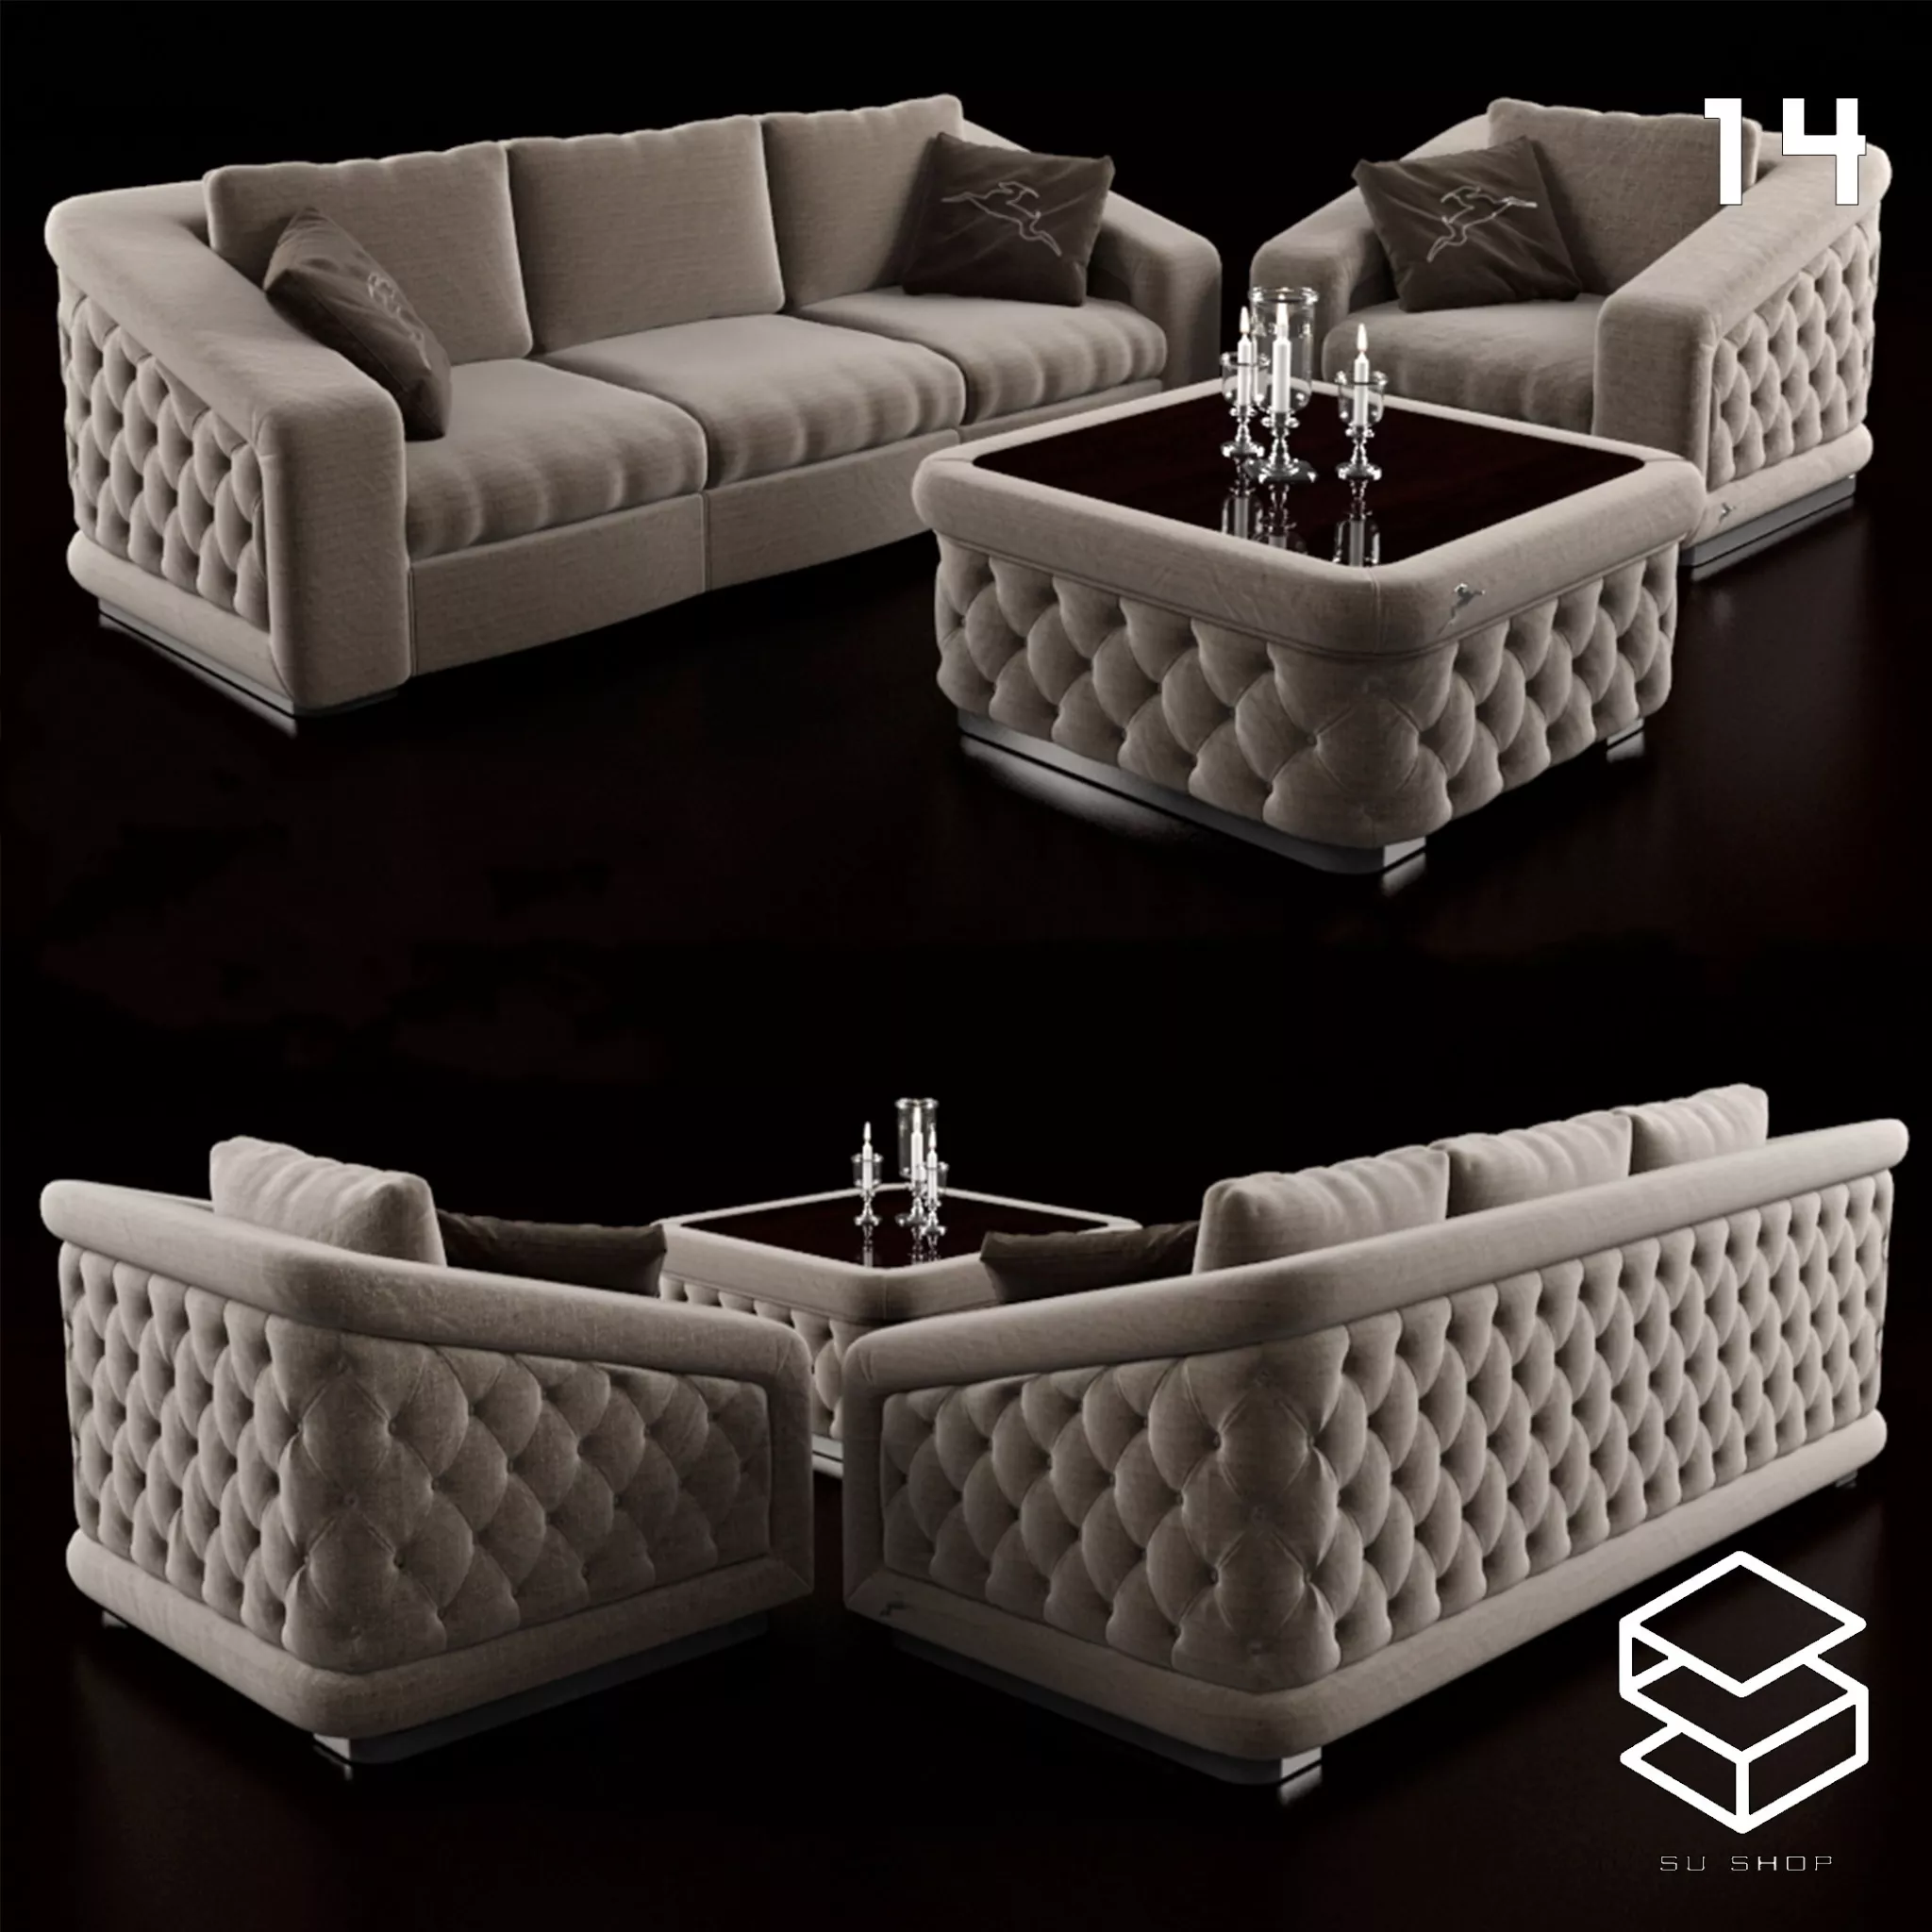 MODERN SOFA - SKETCHUP 3D MODEL - VRAY OR ENSCAPE - ID13430